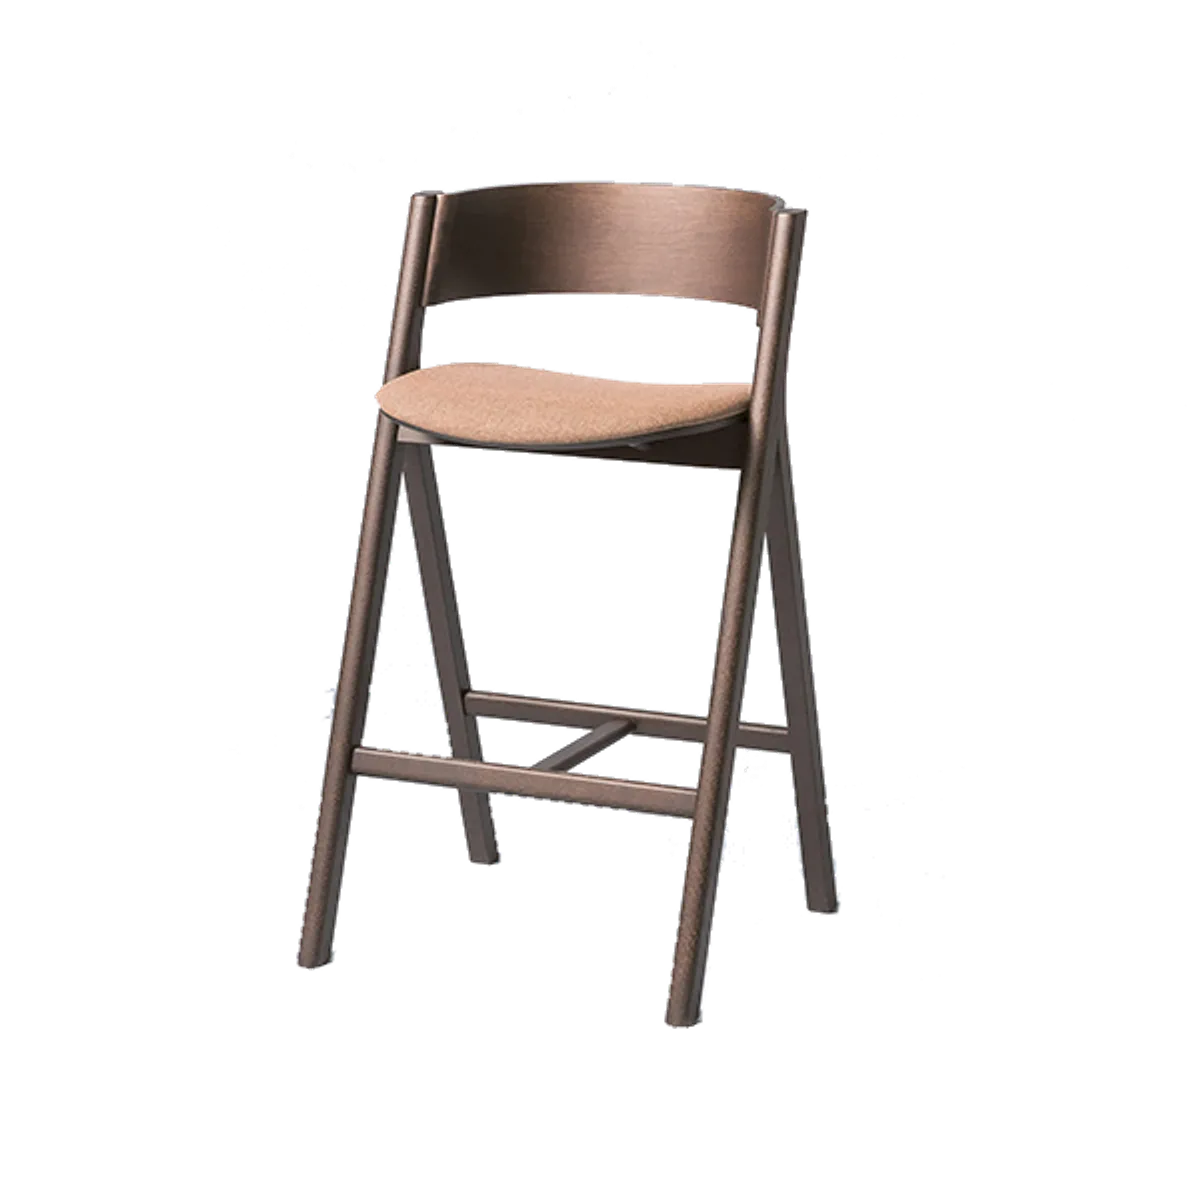 Folly Soft Bar Stool Ash Wood Inside Out Contracts